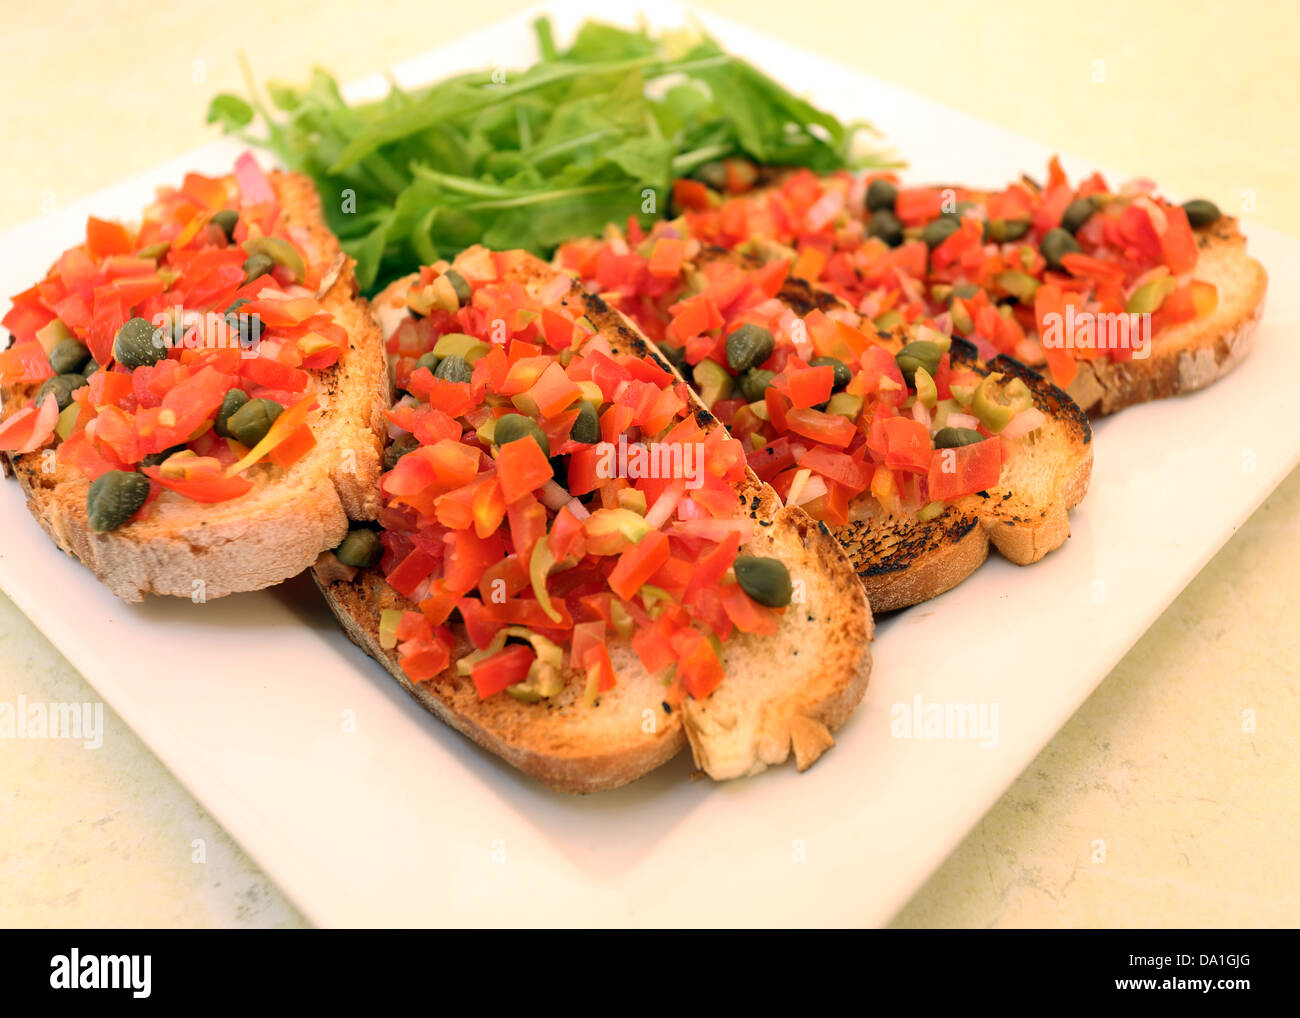 SQUARE PLATE WITH BRUSCHETTA: SLICES OF CRISPY BREAD TOPPED WITH CHOPPED TOMATOES,GARLIC,OLICE OIL AND CAPERS,ROCKET LEAVES GARN Stock Photo